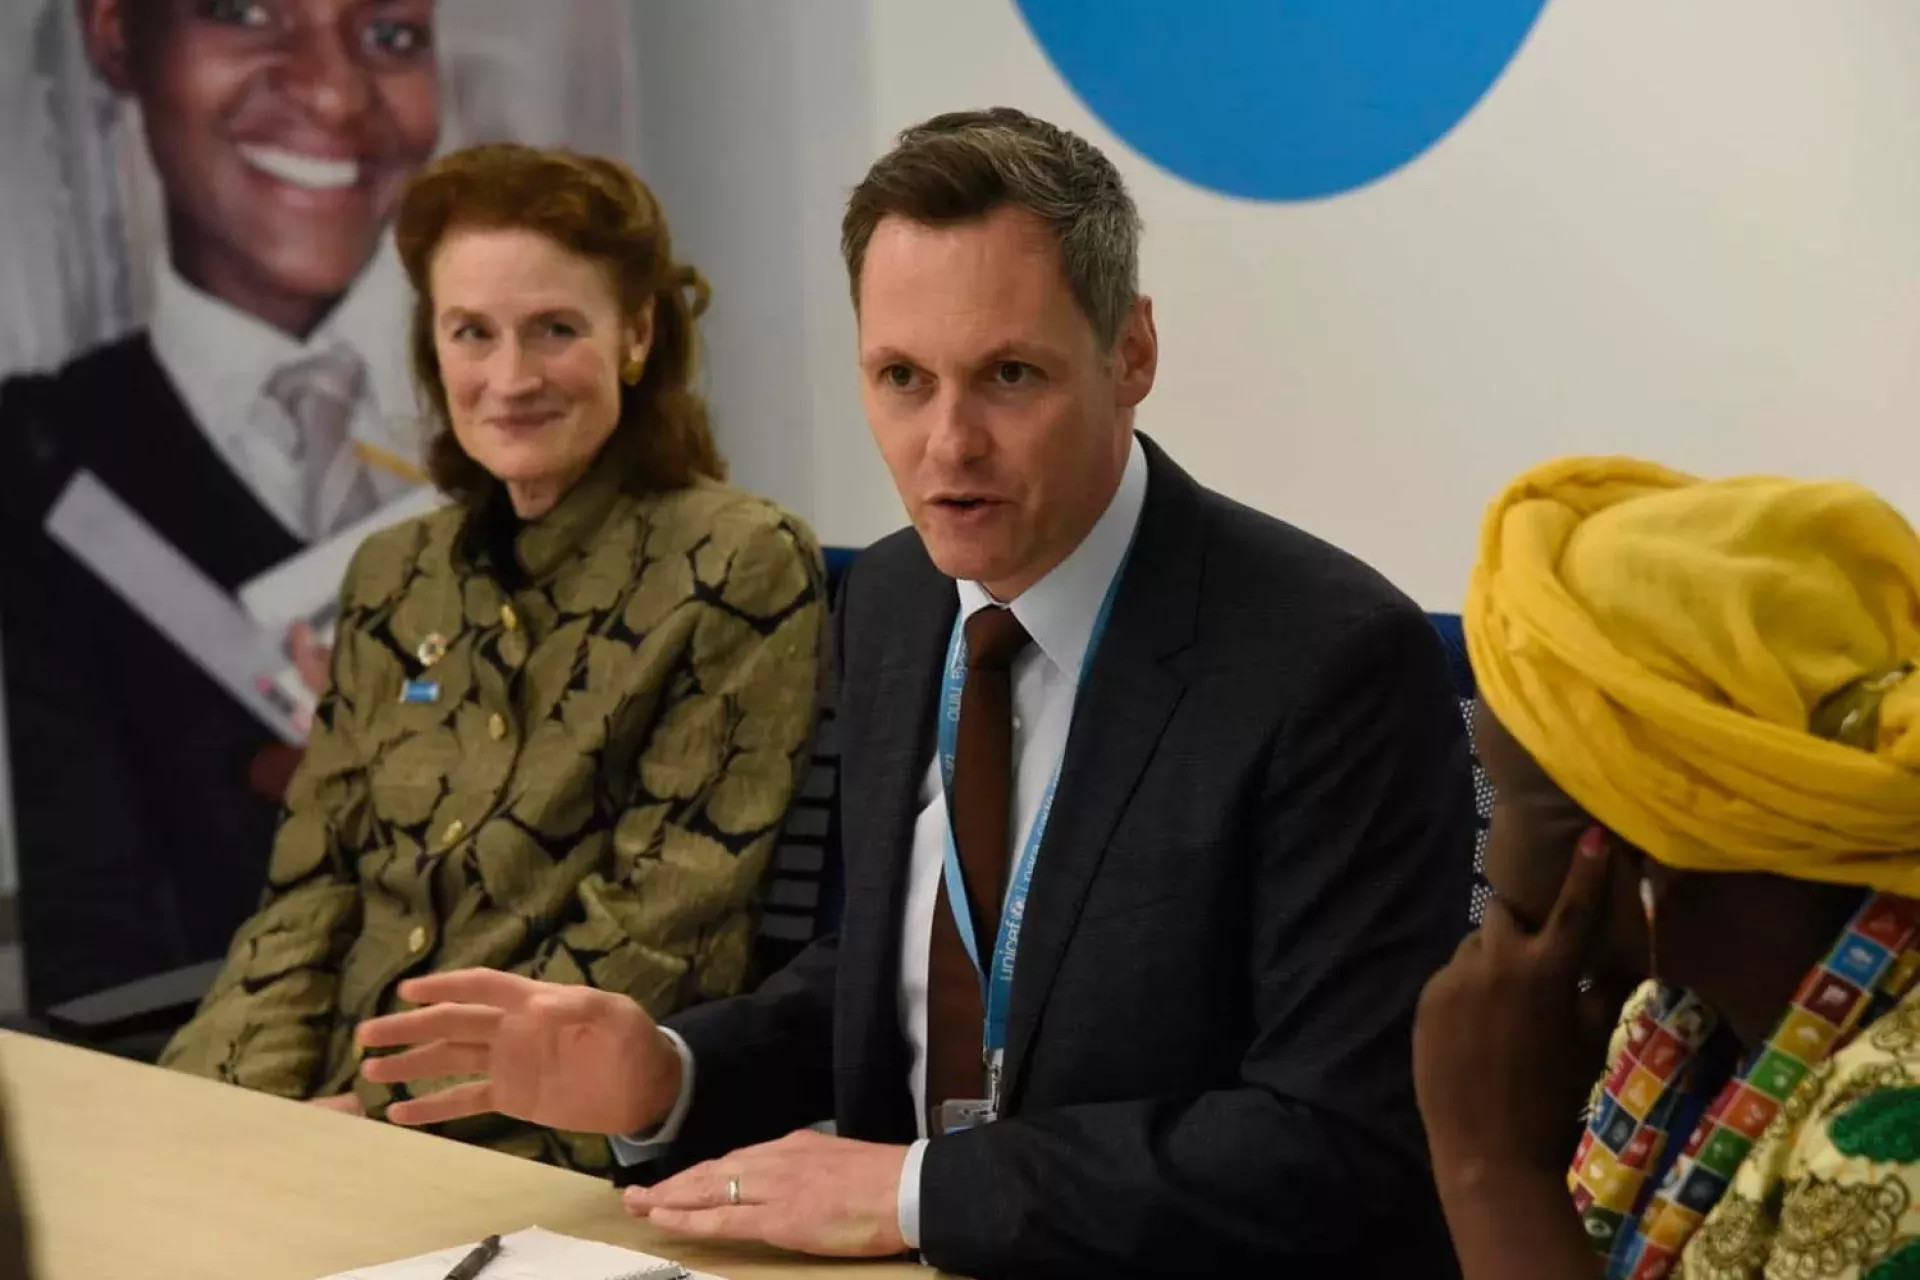 UNICEF Executive Director Henrietta Fore (left) and Benes lead a meeting of Generation Unlimited Champions